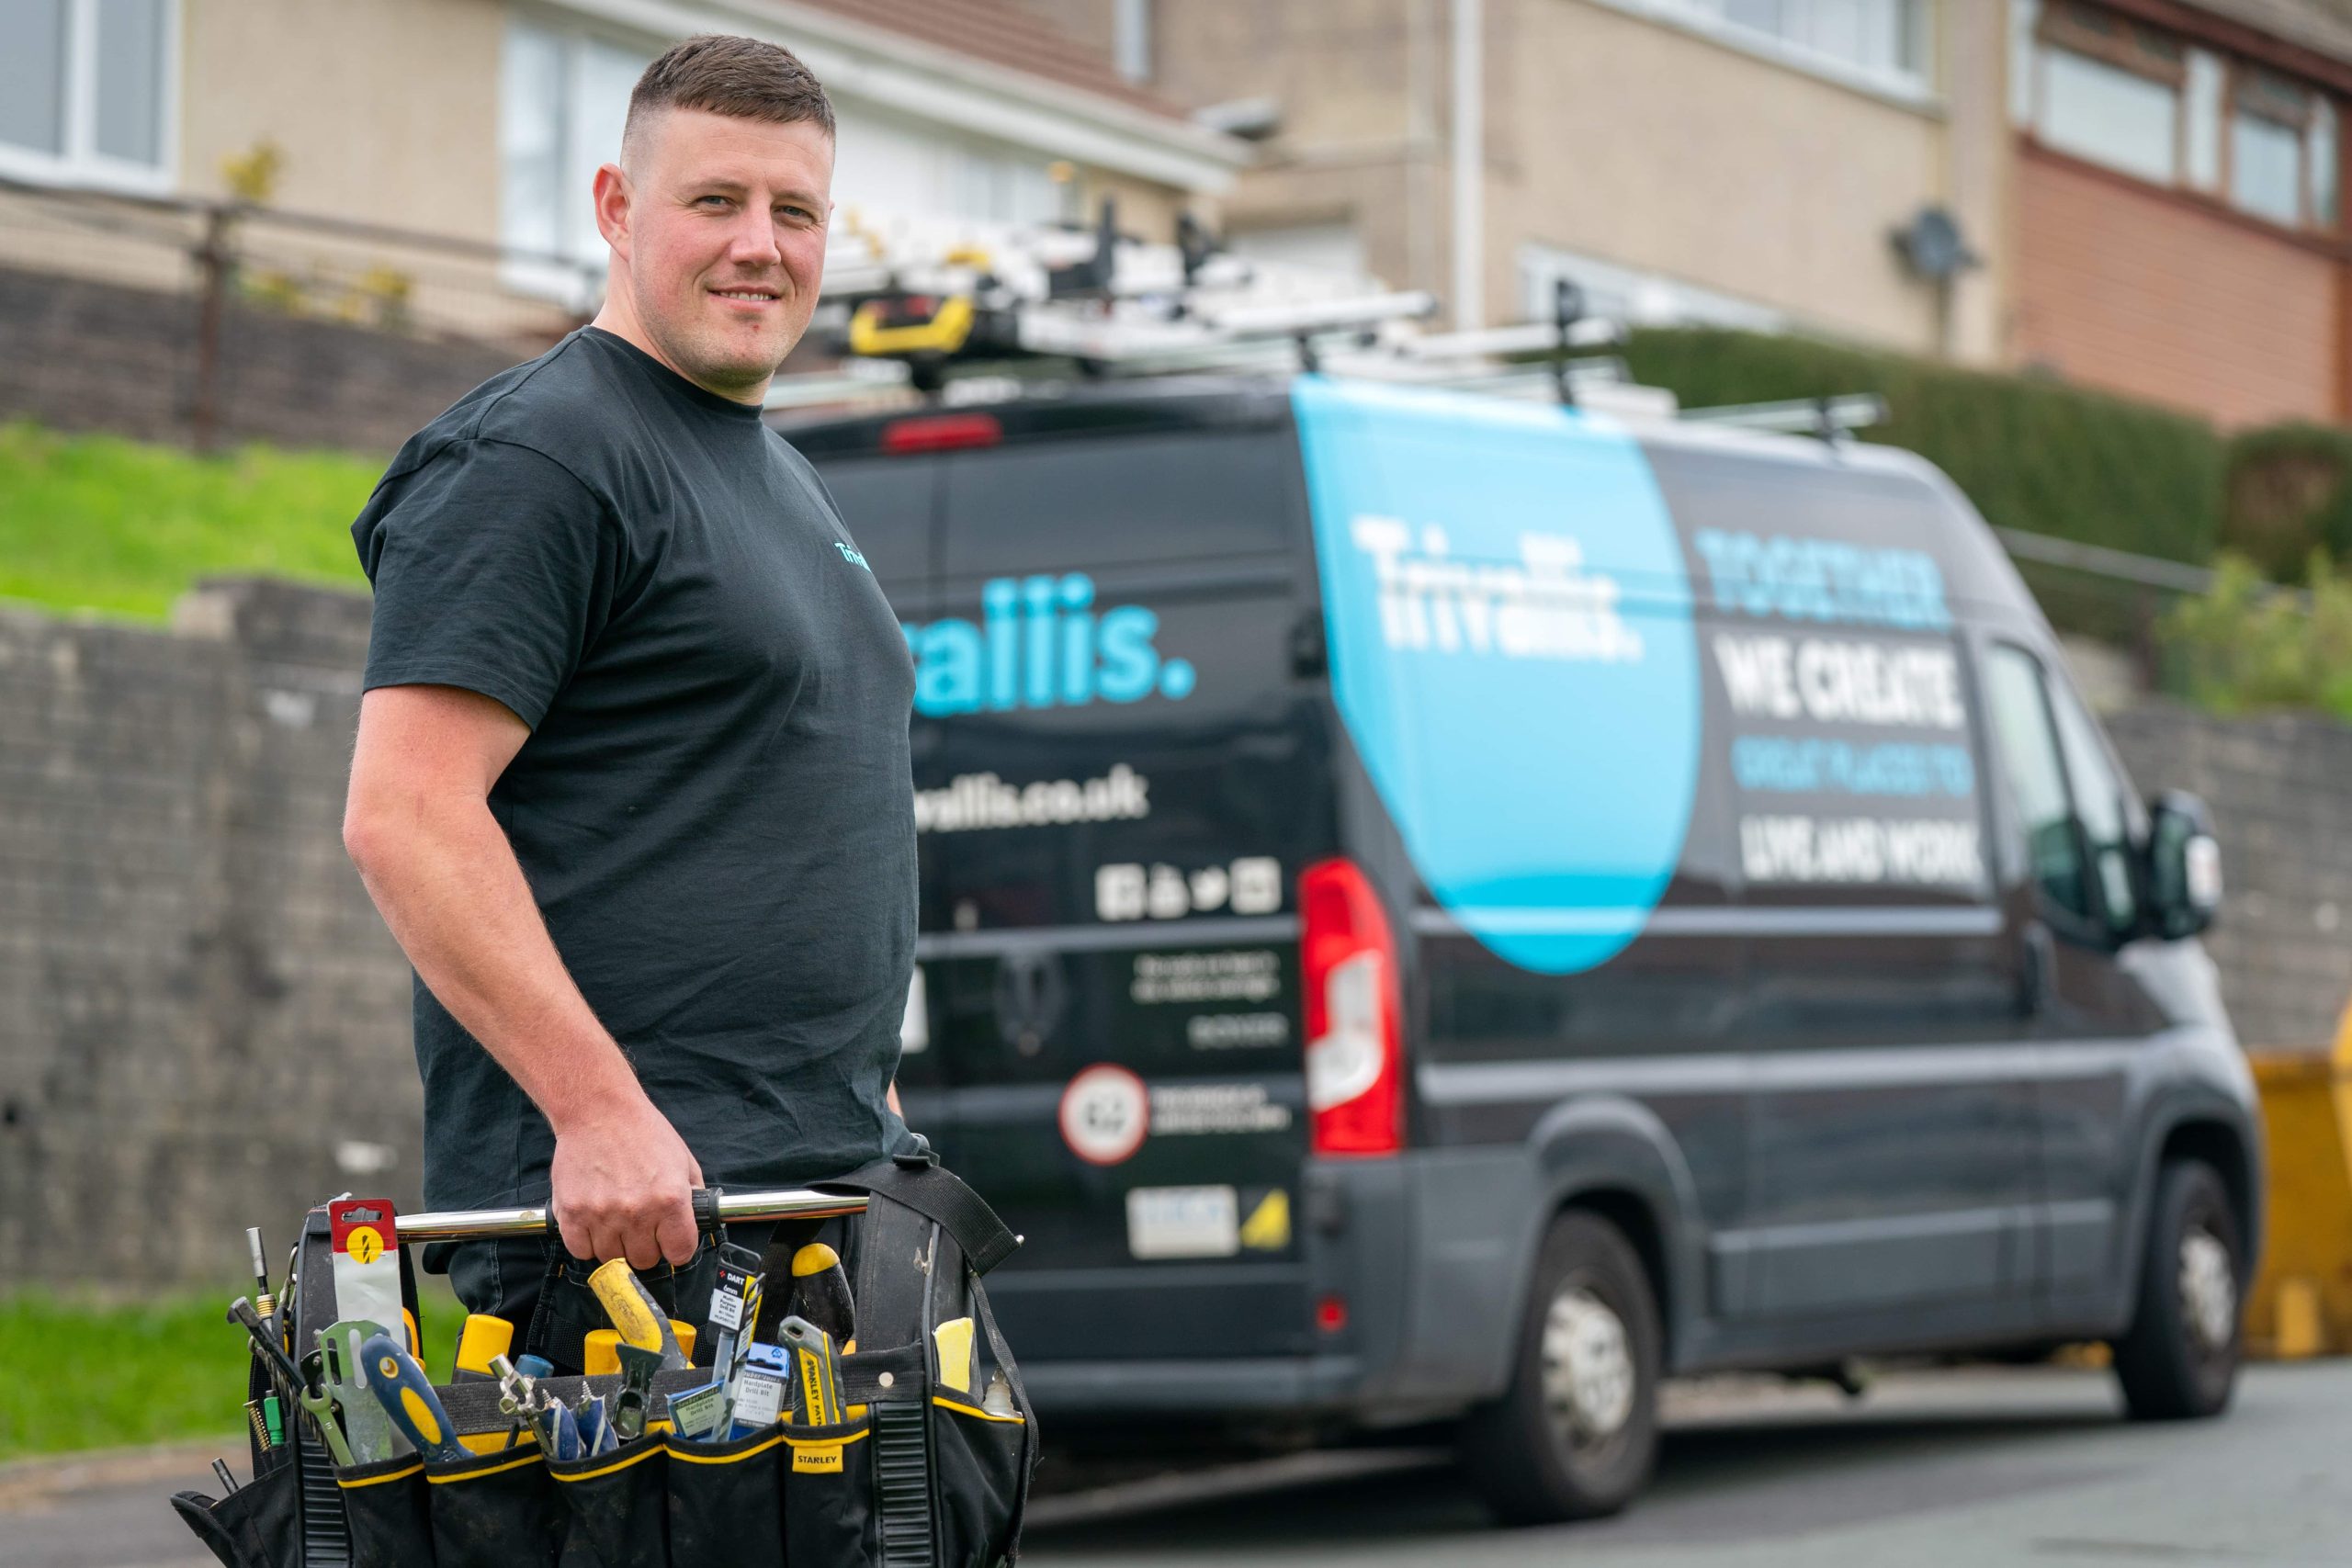 A man carrying a toolbox smiling in front of a service van with "trivallis" branding.